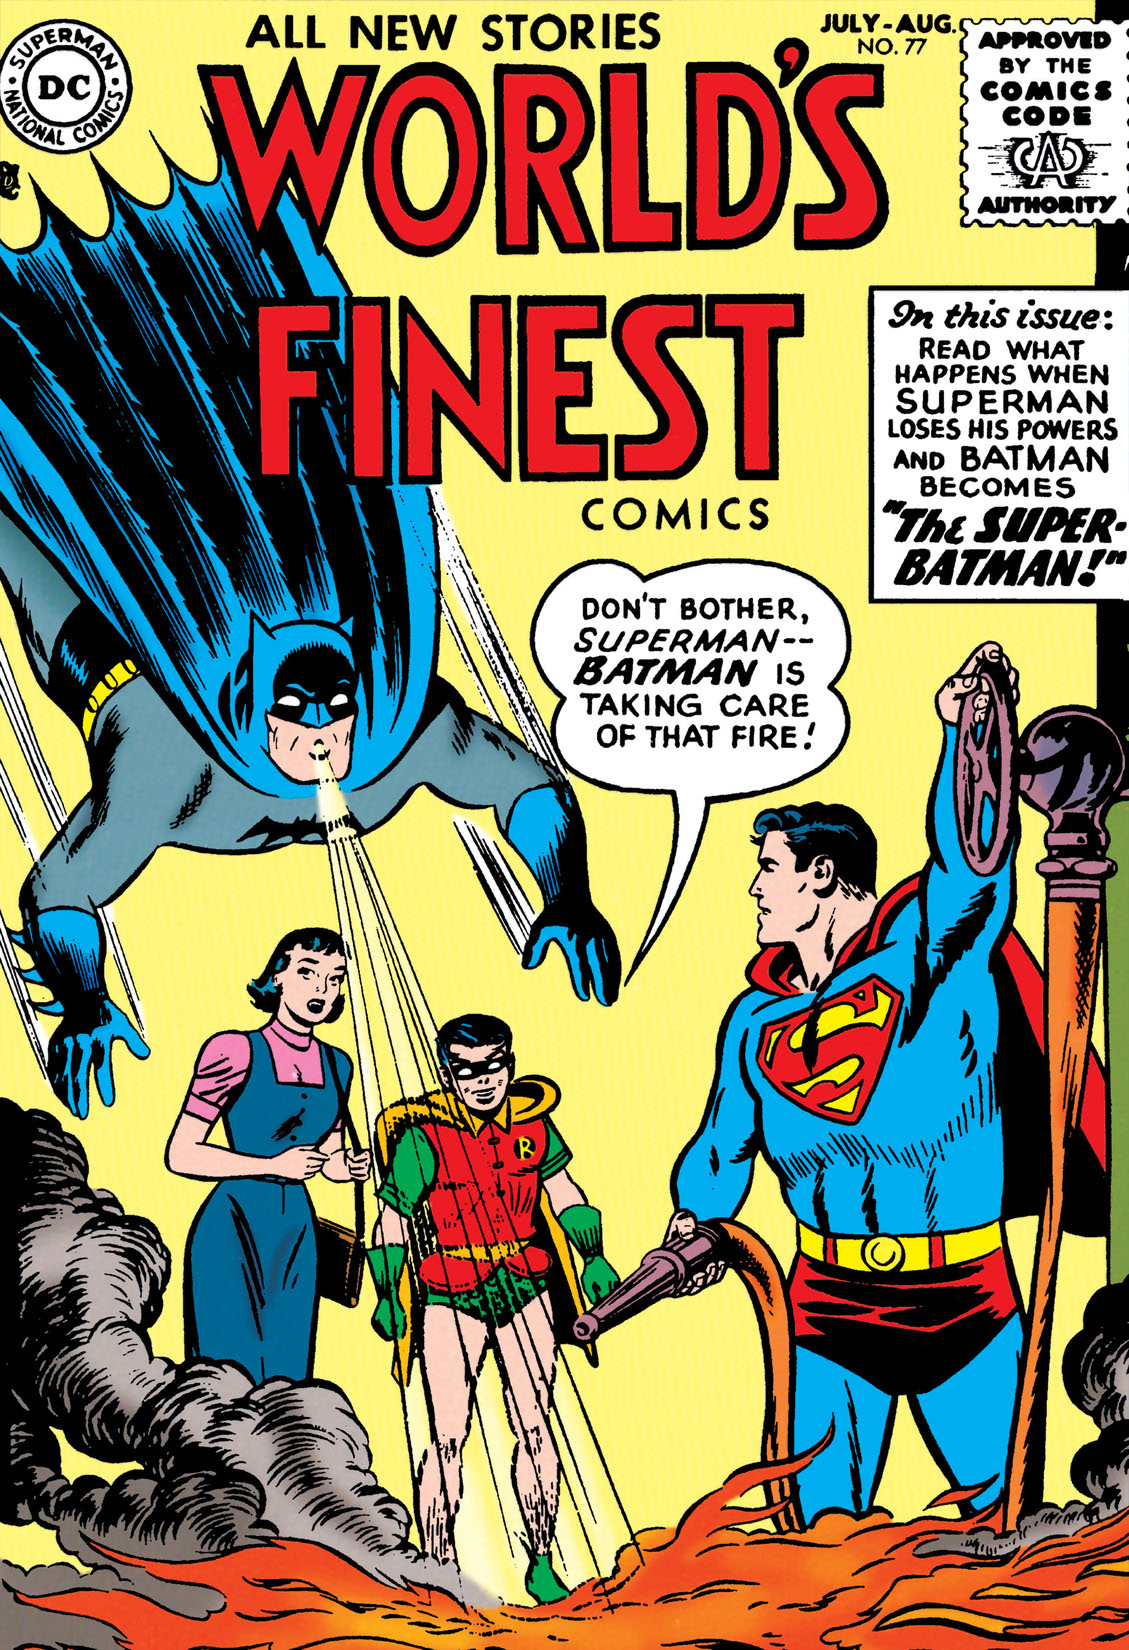 World's Finest Comics (1941-) #77 preview images